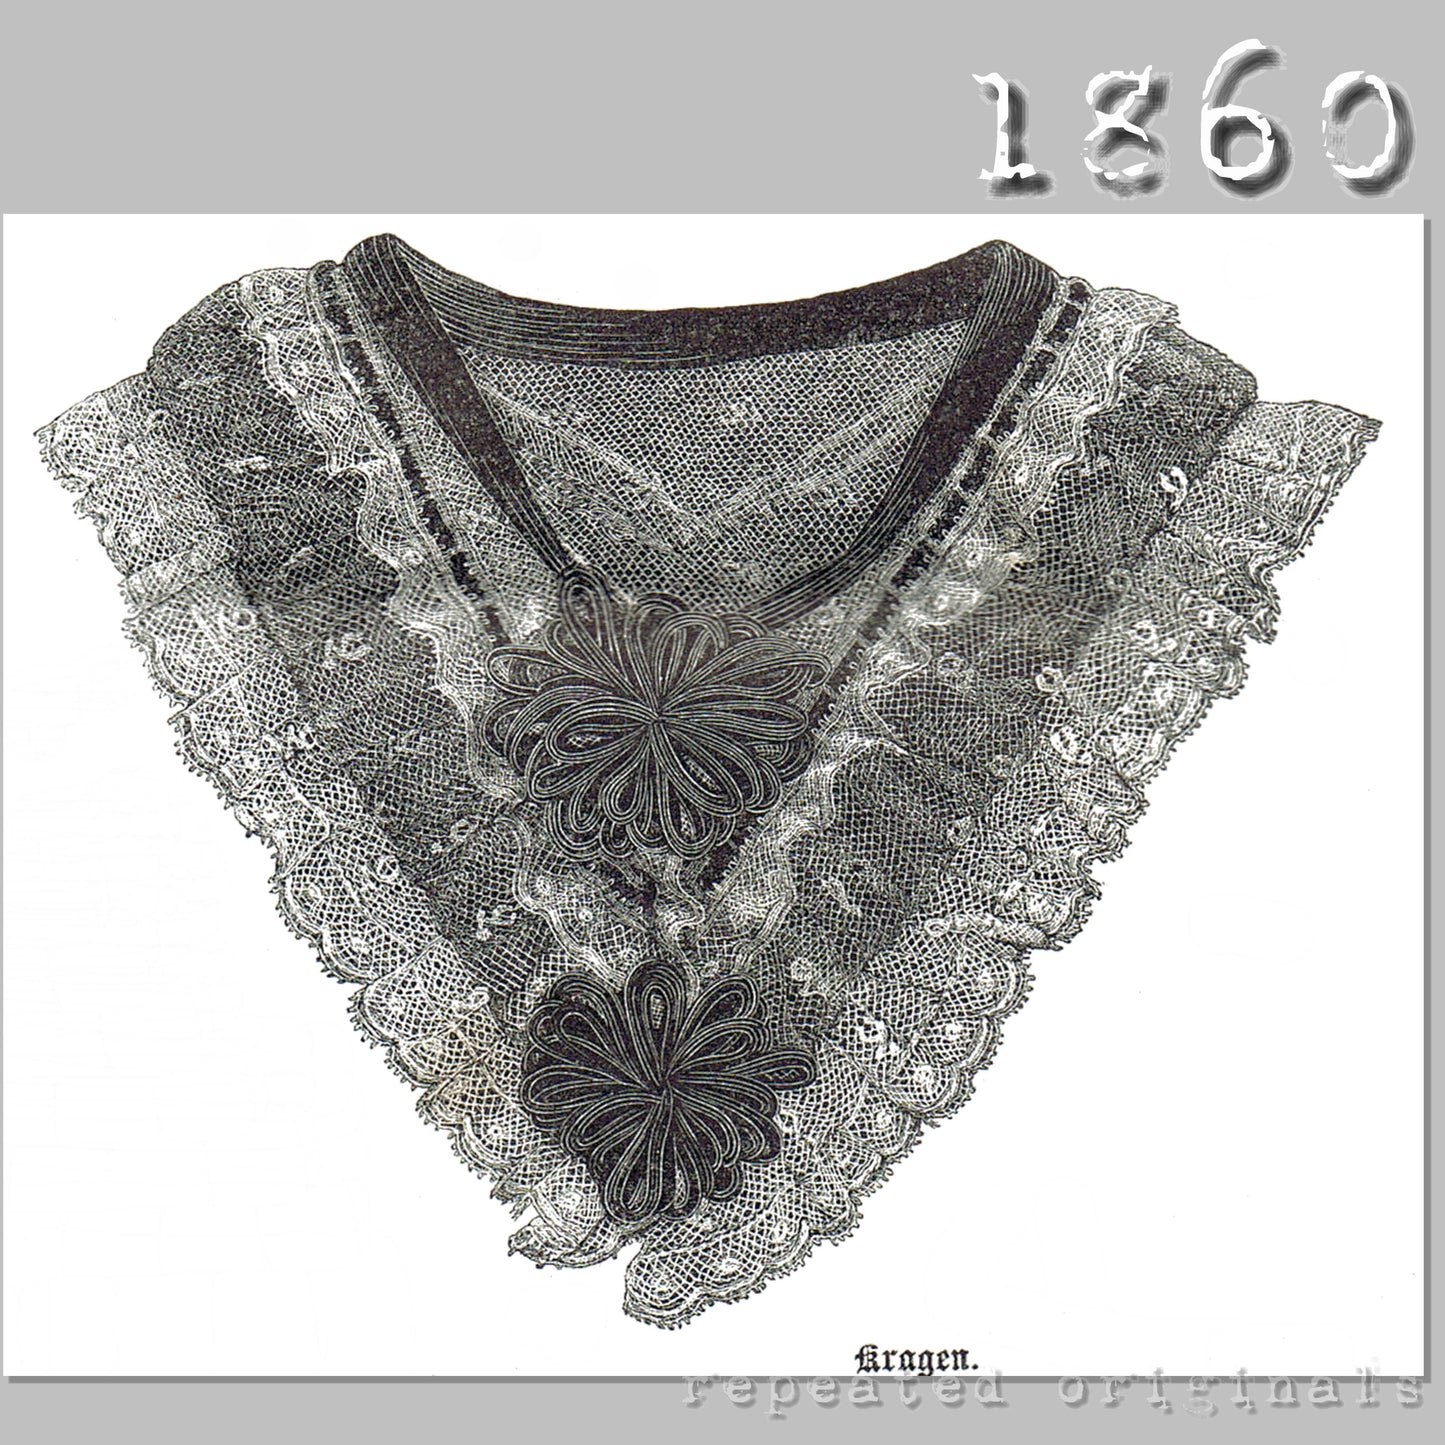 1860 Elegant Collar and Cuffs Sewing Pattern - INSTANT DOWNLOAD PDF